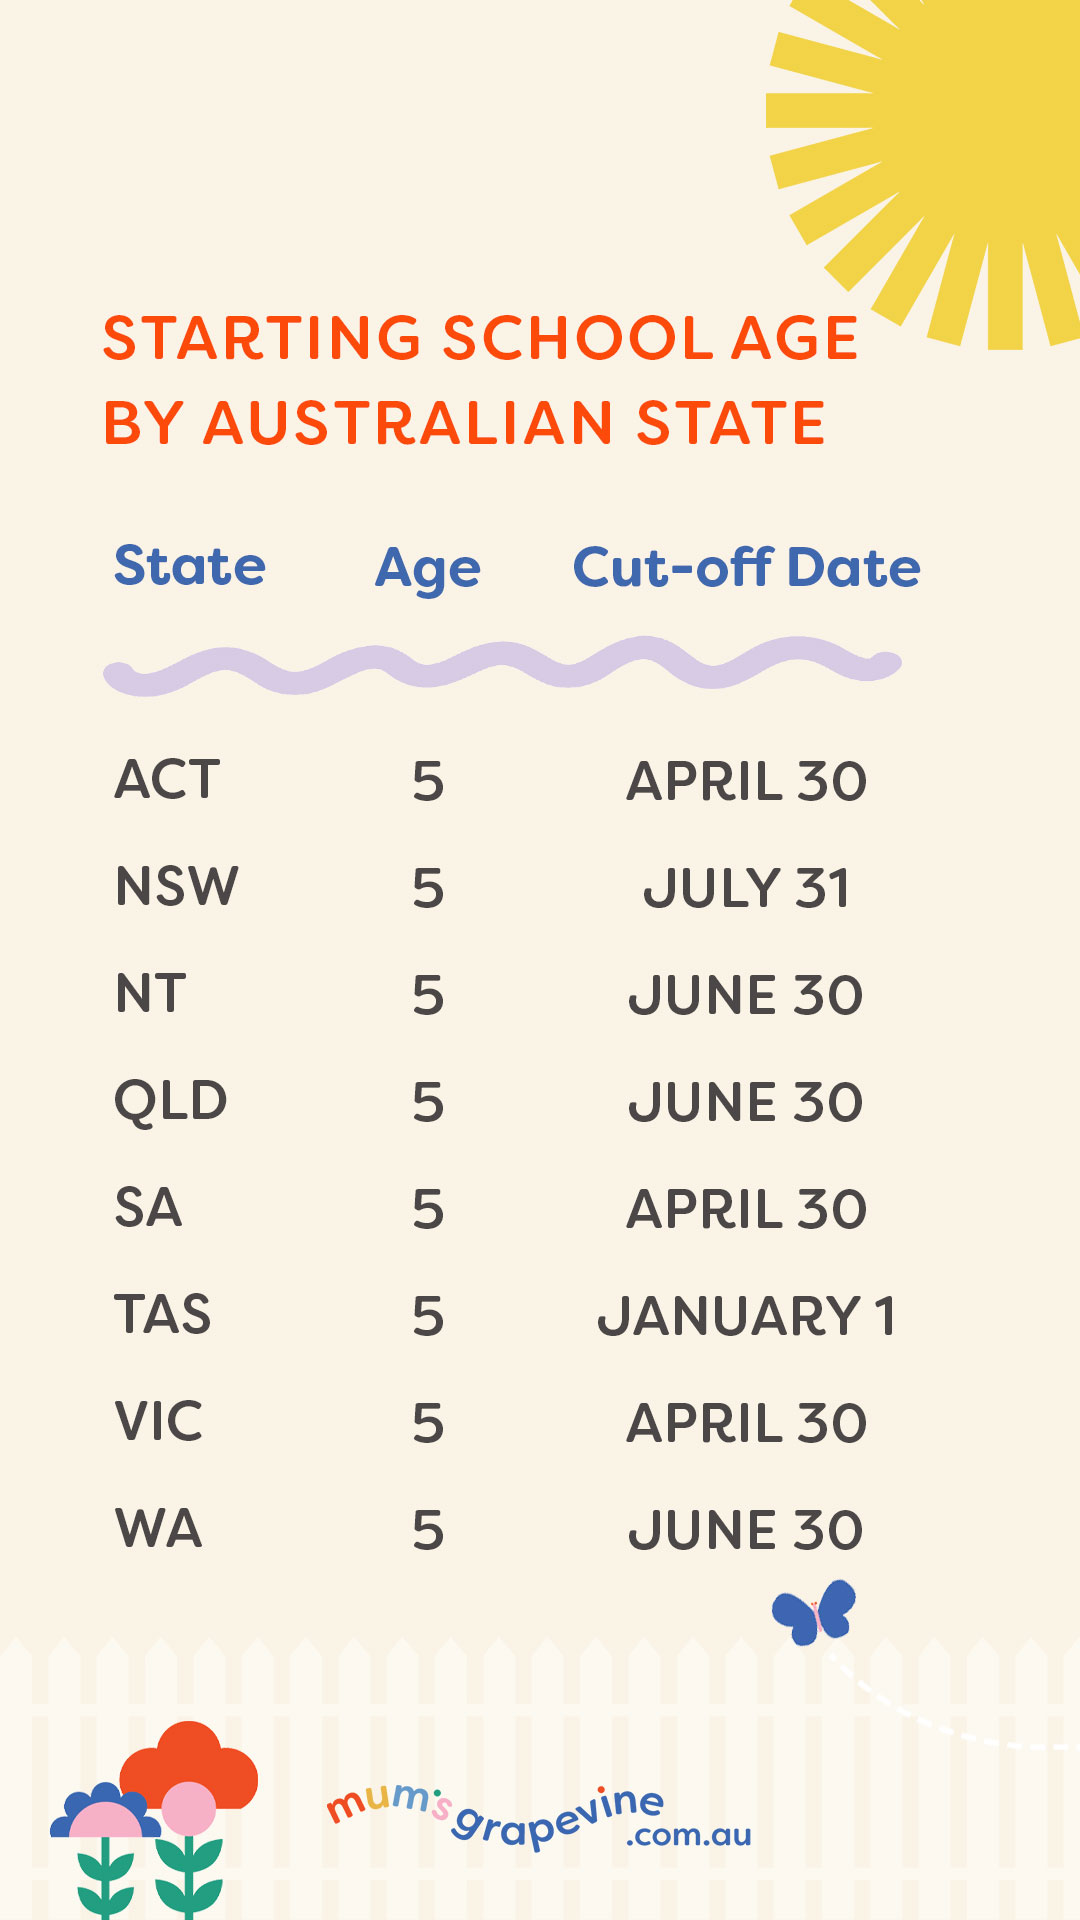 A graphic showing the starting school age by Australian state